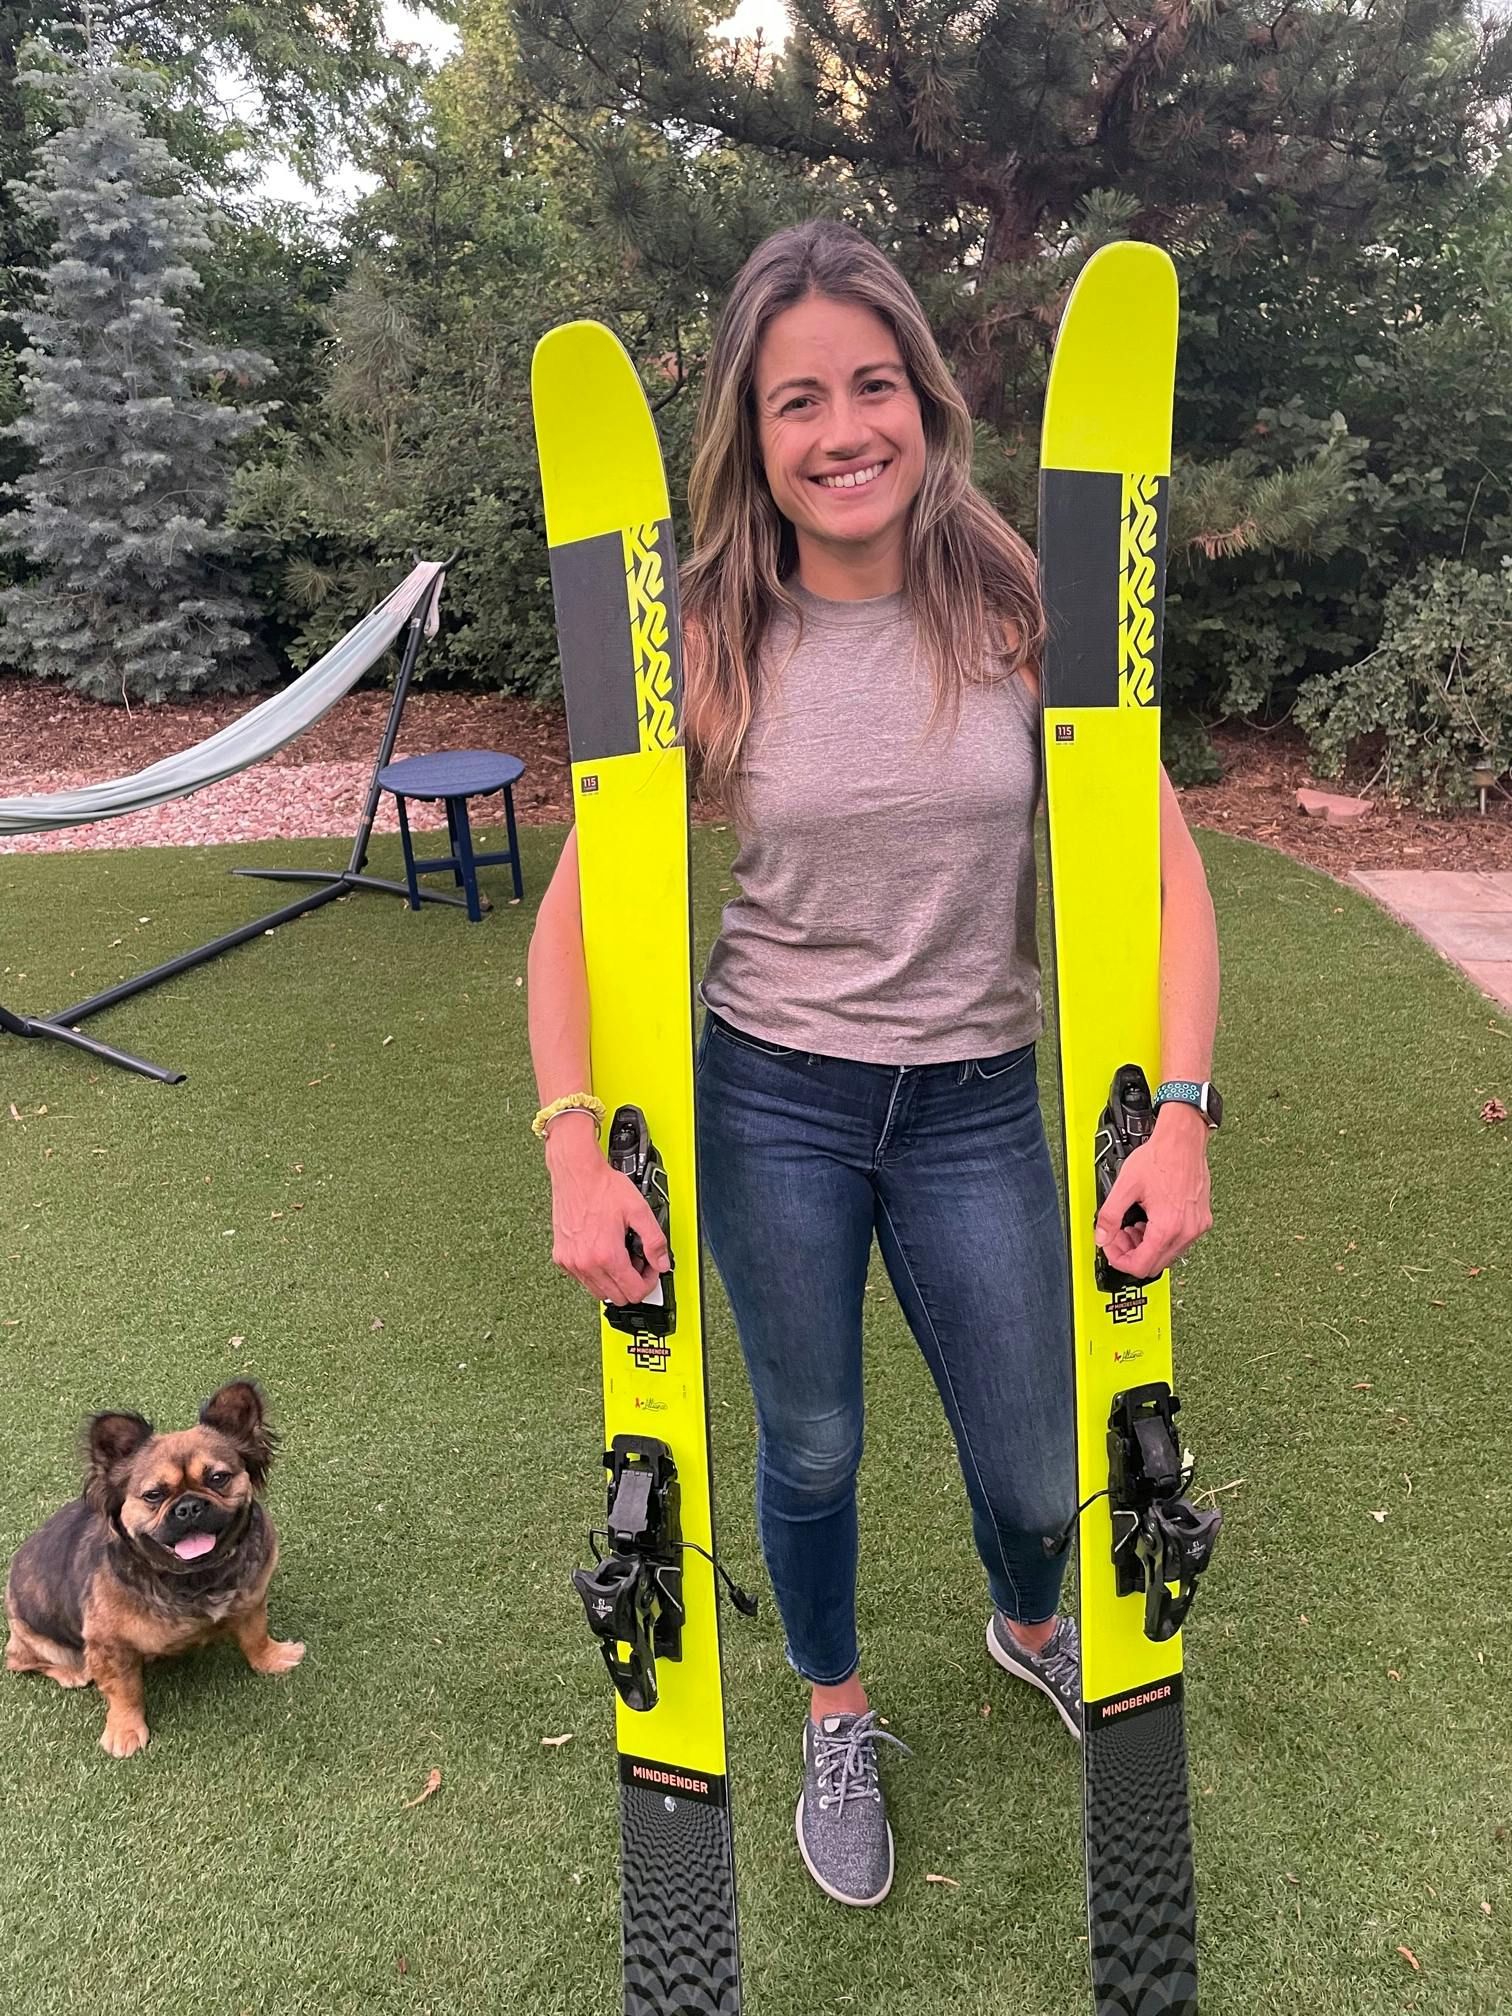 A woman holds the K2 Mindbender 116C skis.